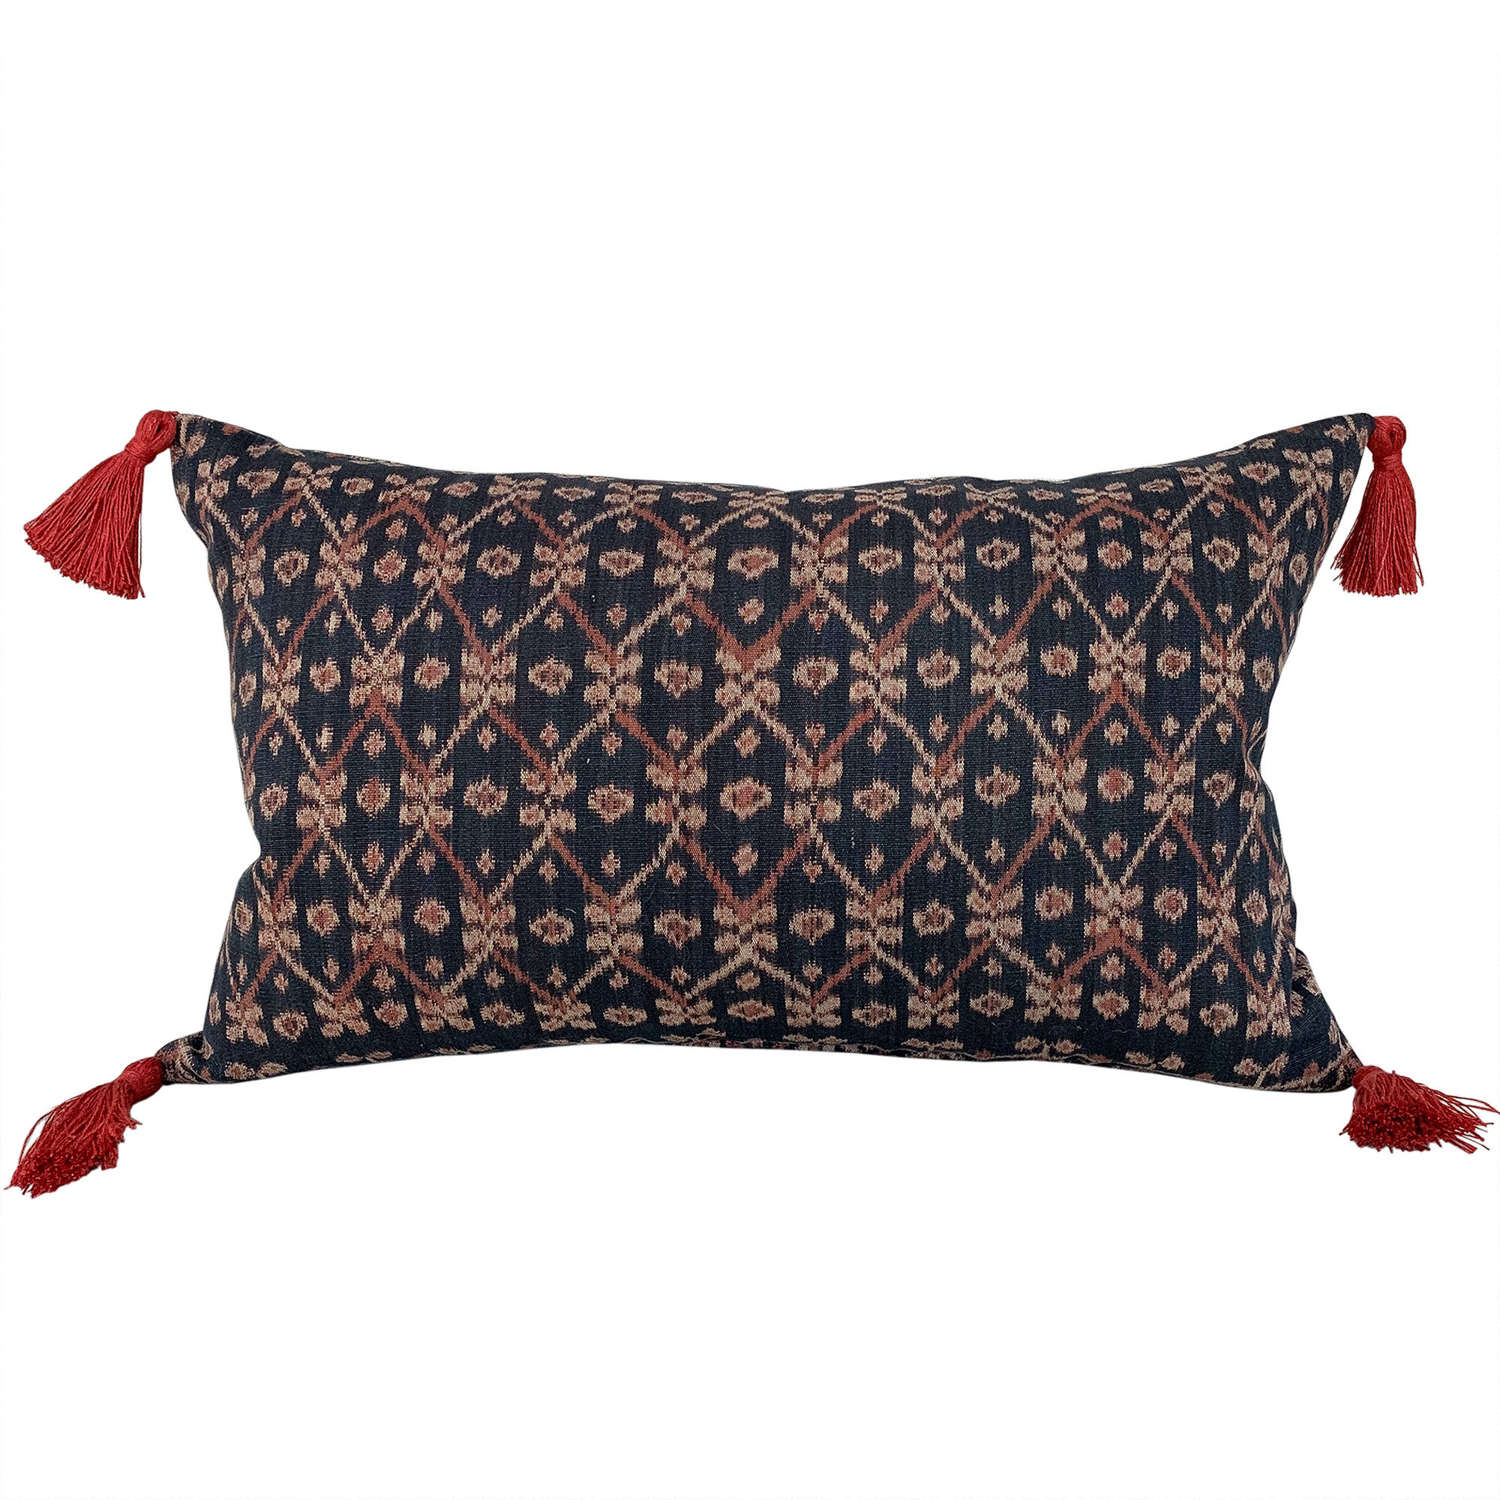 Flores ikat cushions with rust coloured tassels